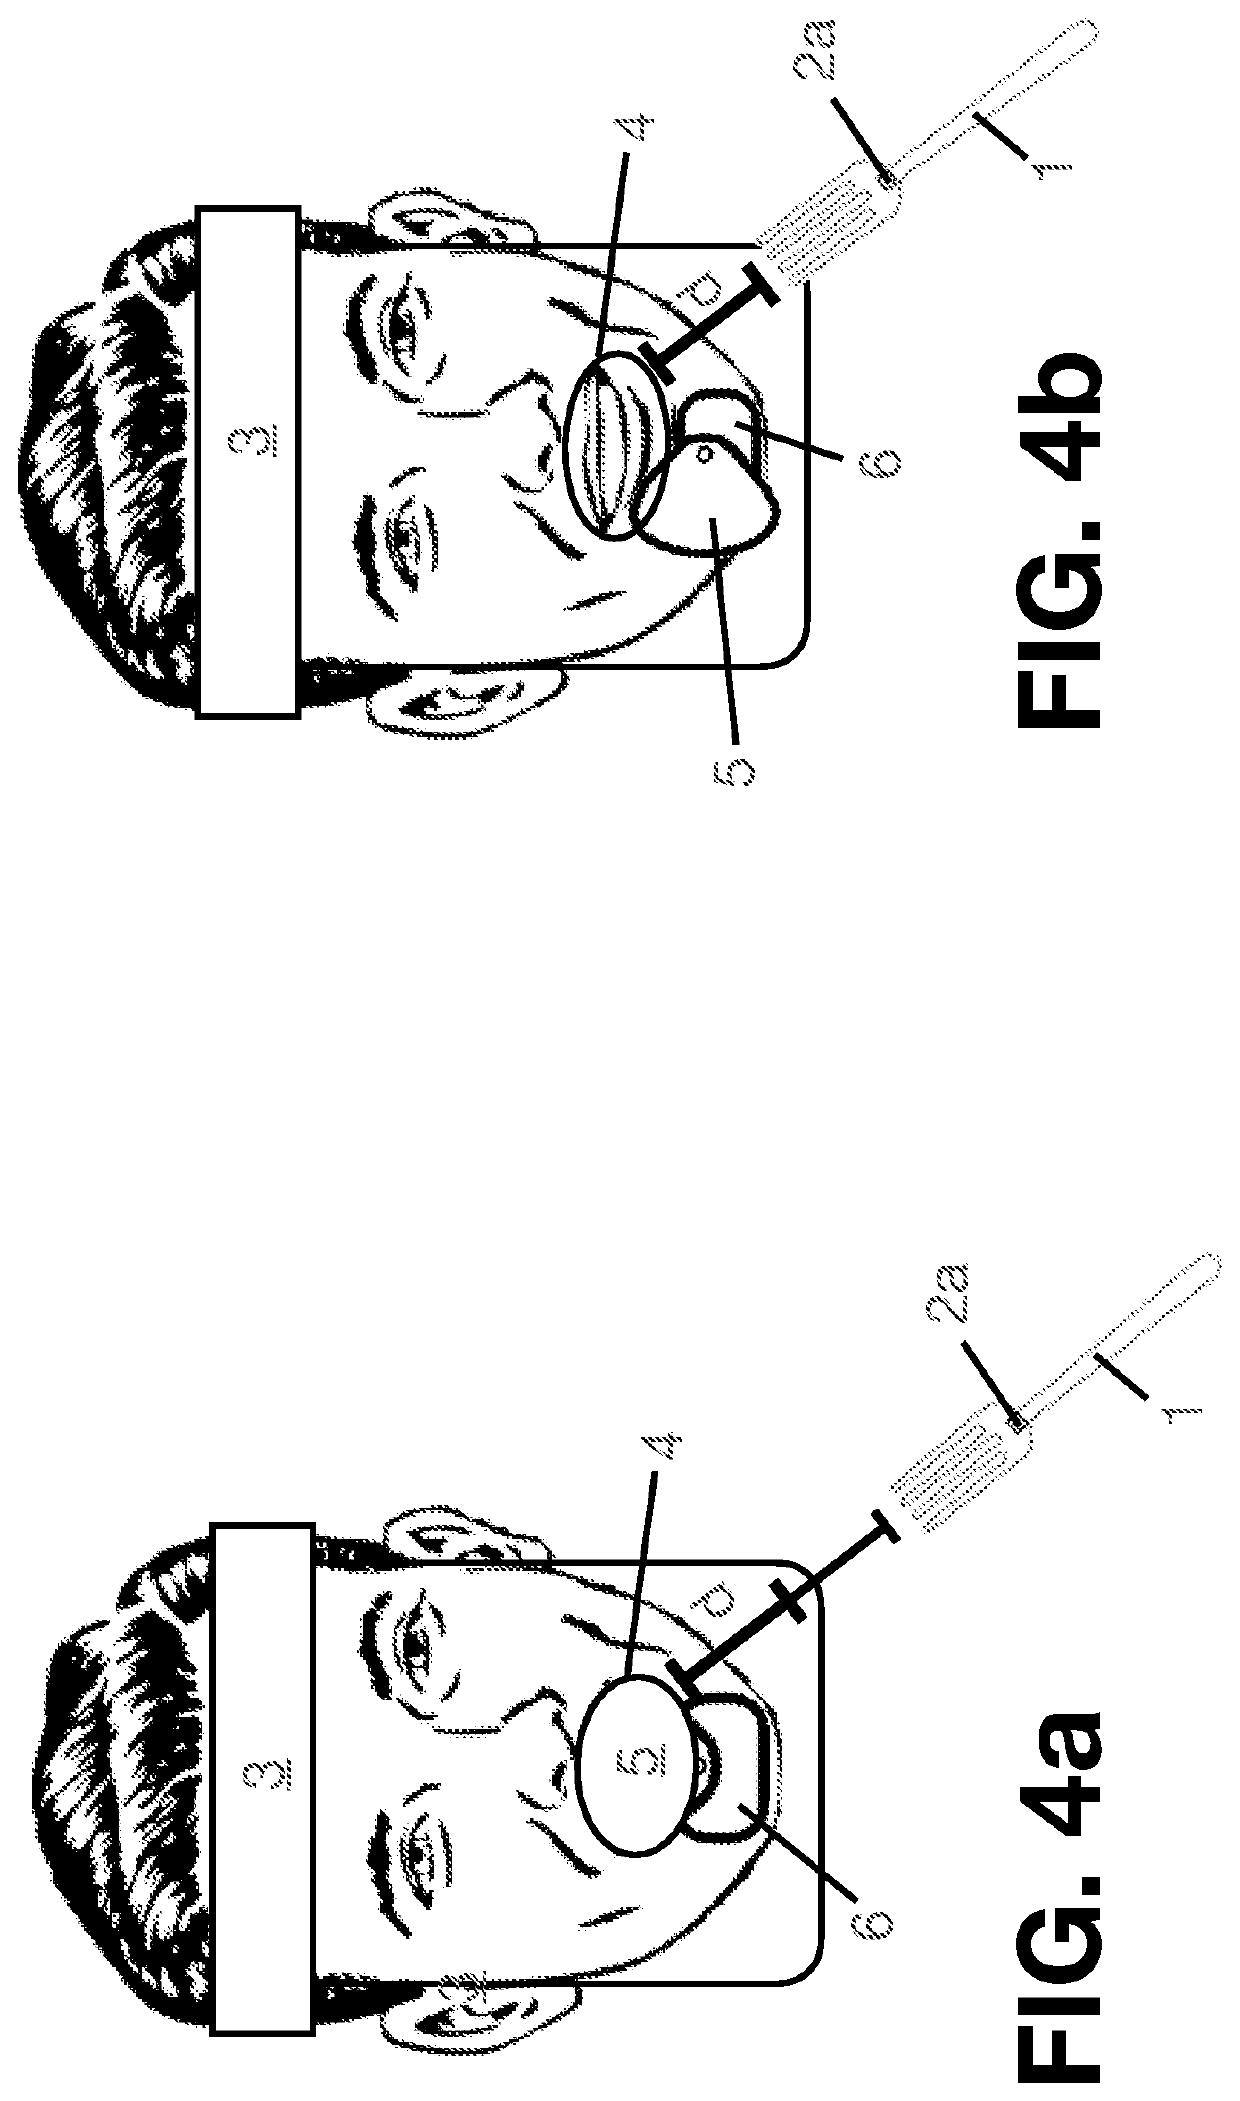 Apparatus for safe eating and drinking in public during airborne contamination